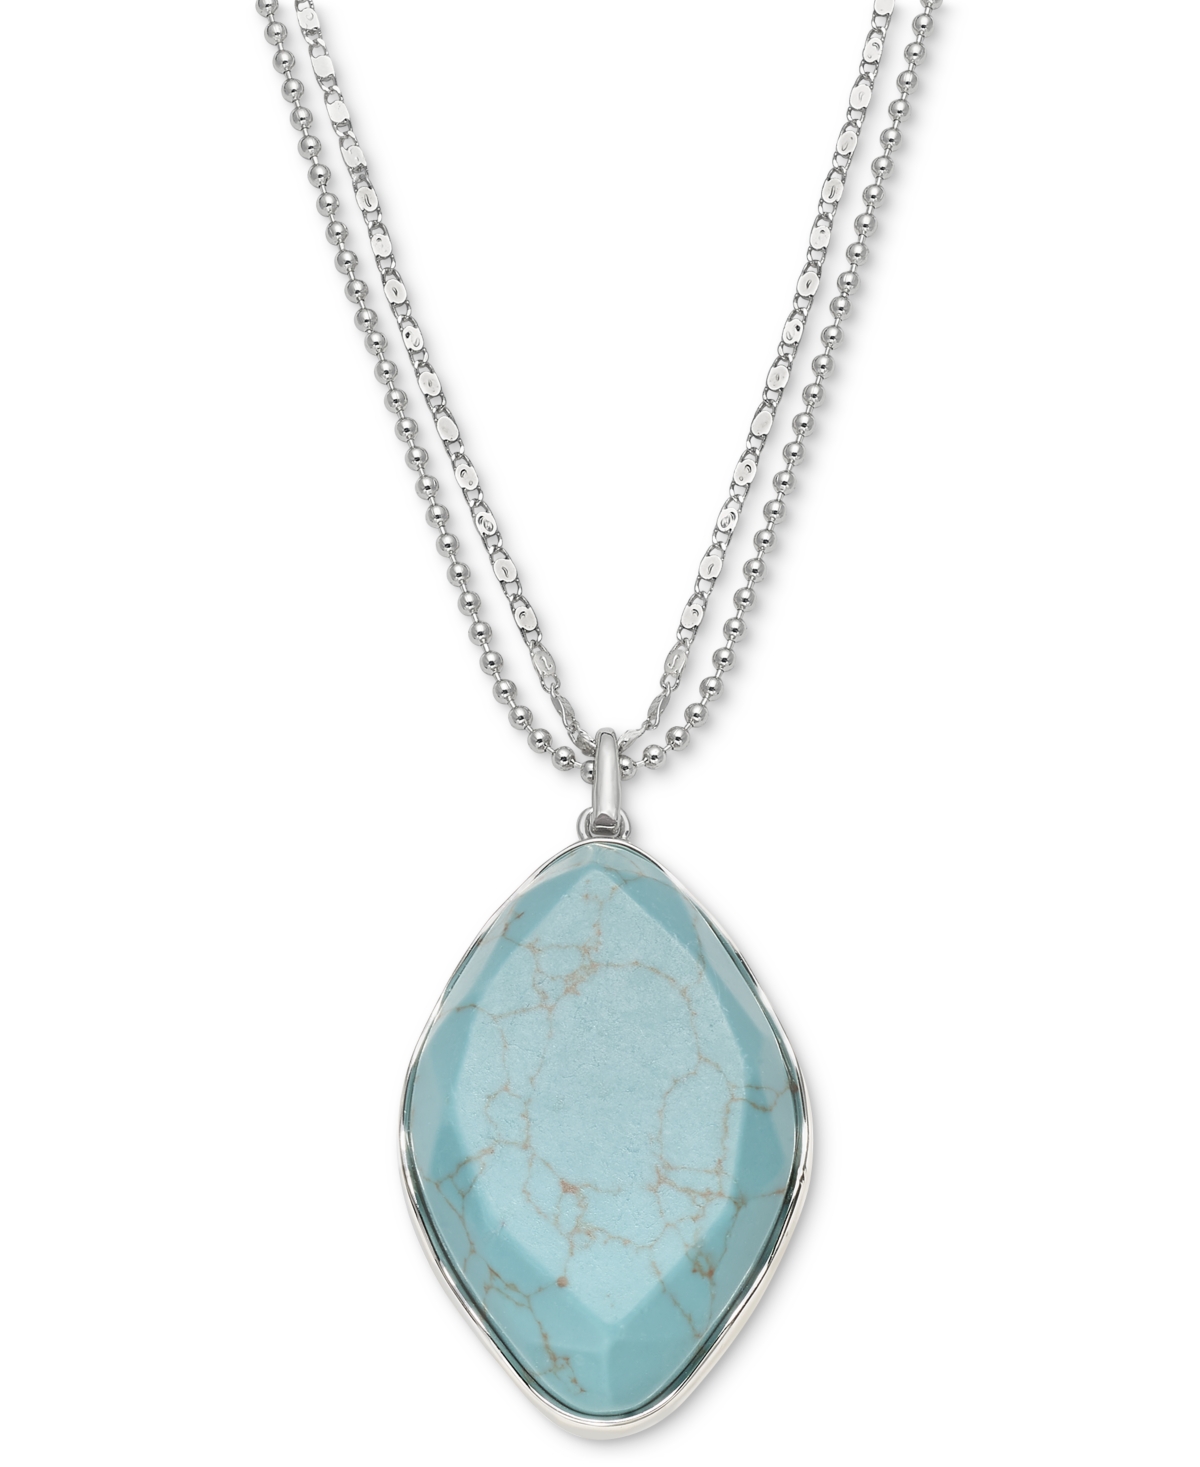 Oval Stone Double Chain Pendant Necklace, 38" + 3" extender, Created for Macy's - Coral